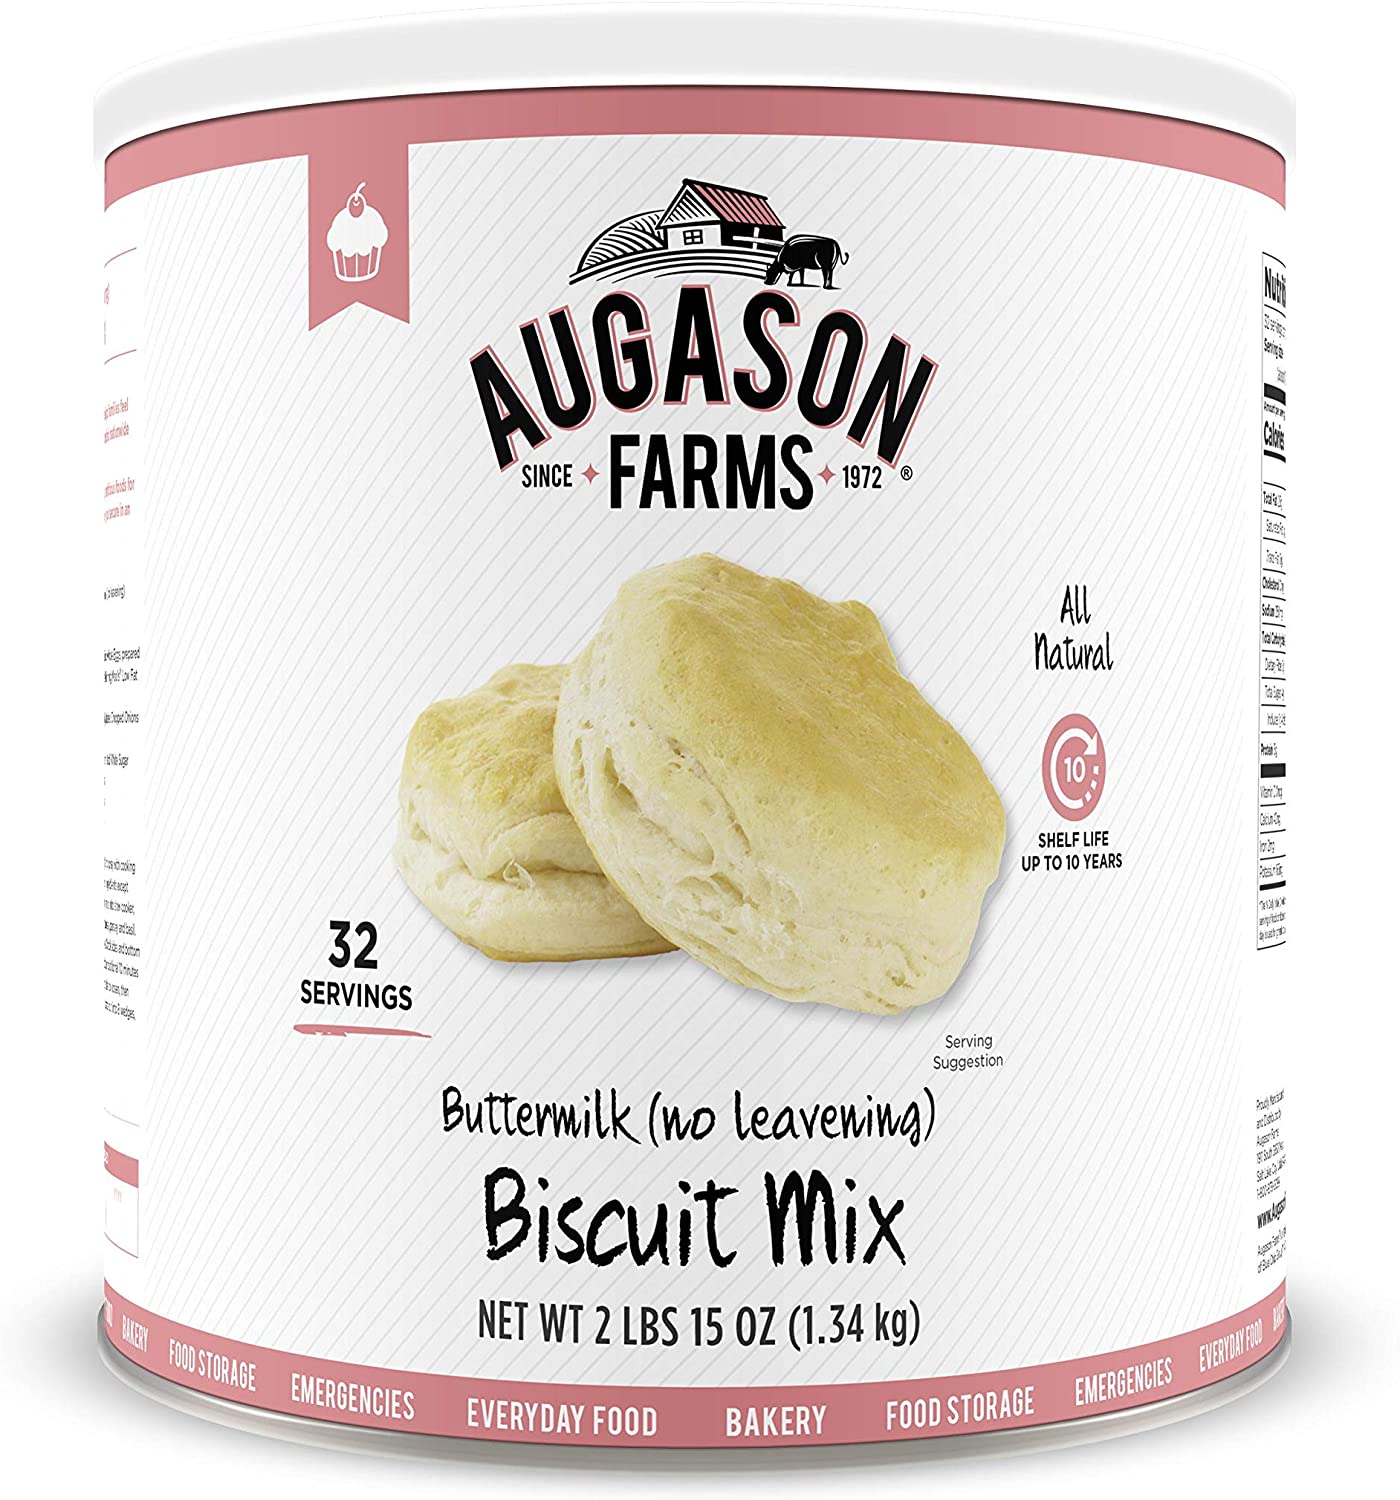 Augason Farms Buttermilk (No Leavening) Biscuit Mix 2 lbs 15 oz No. 10 Can $14.41